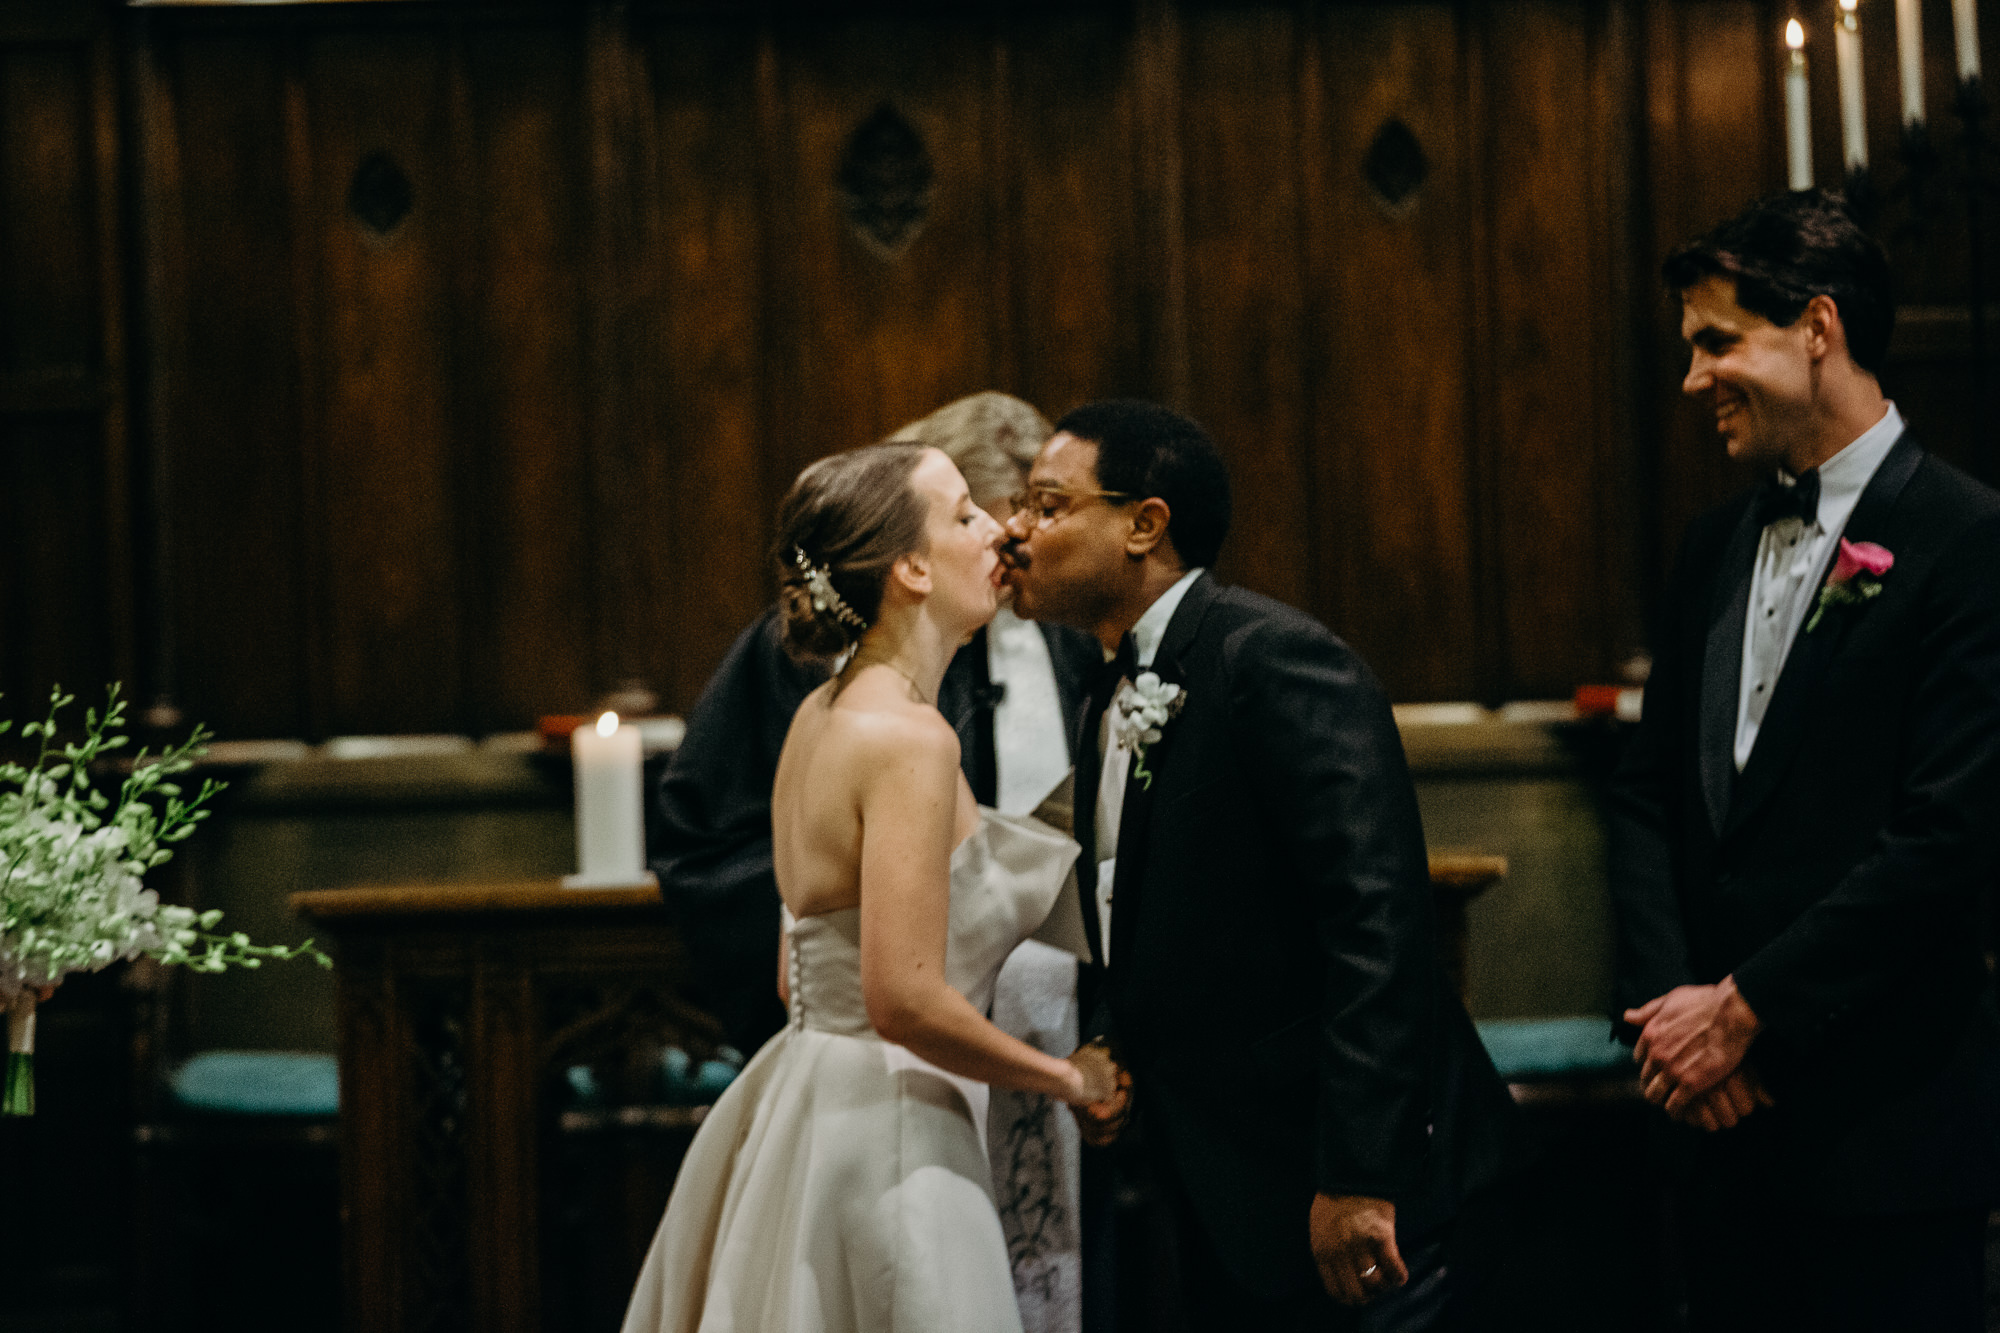 bride and groom kiss during their wedding ceremony at church in new york city, ny